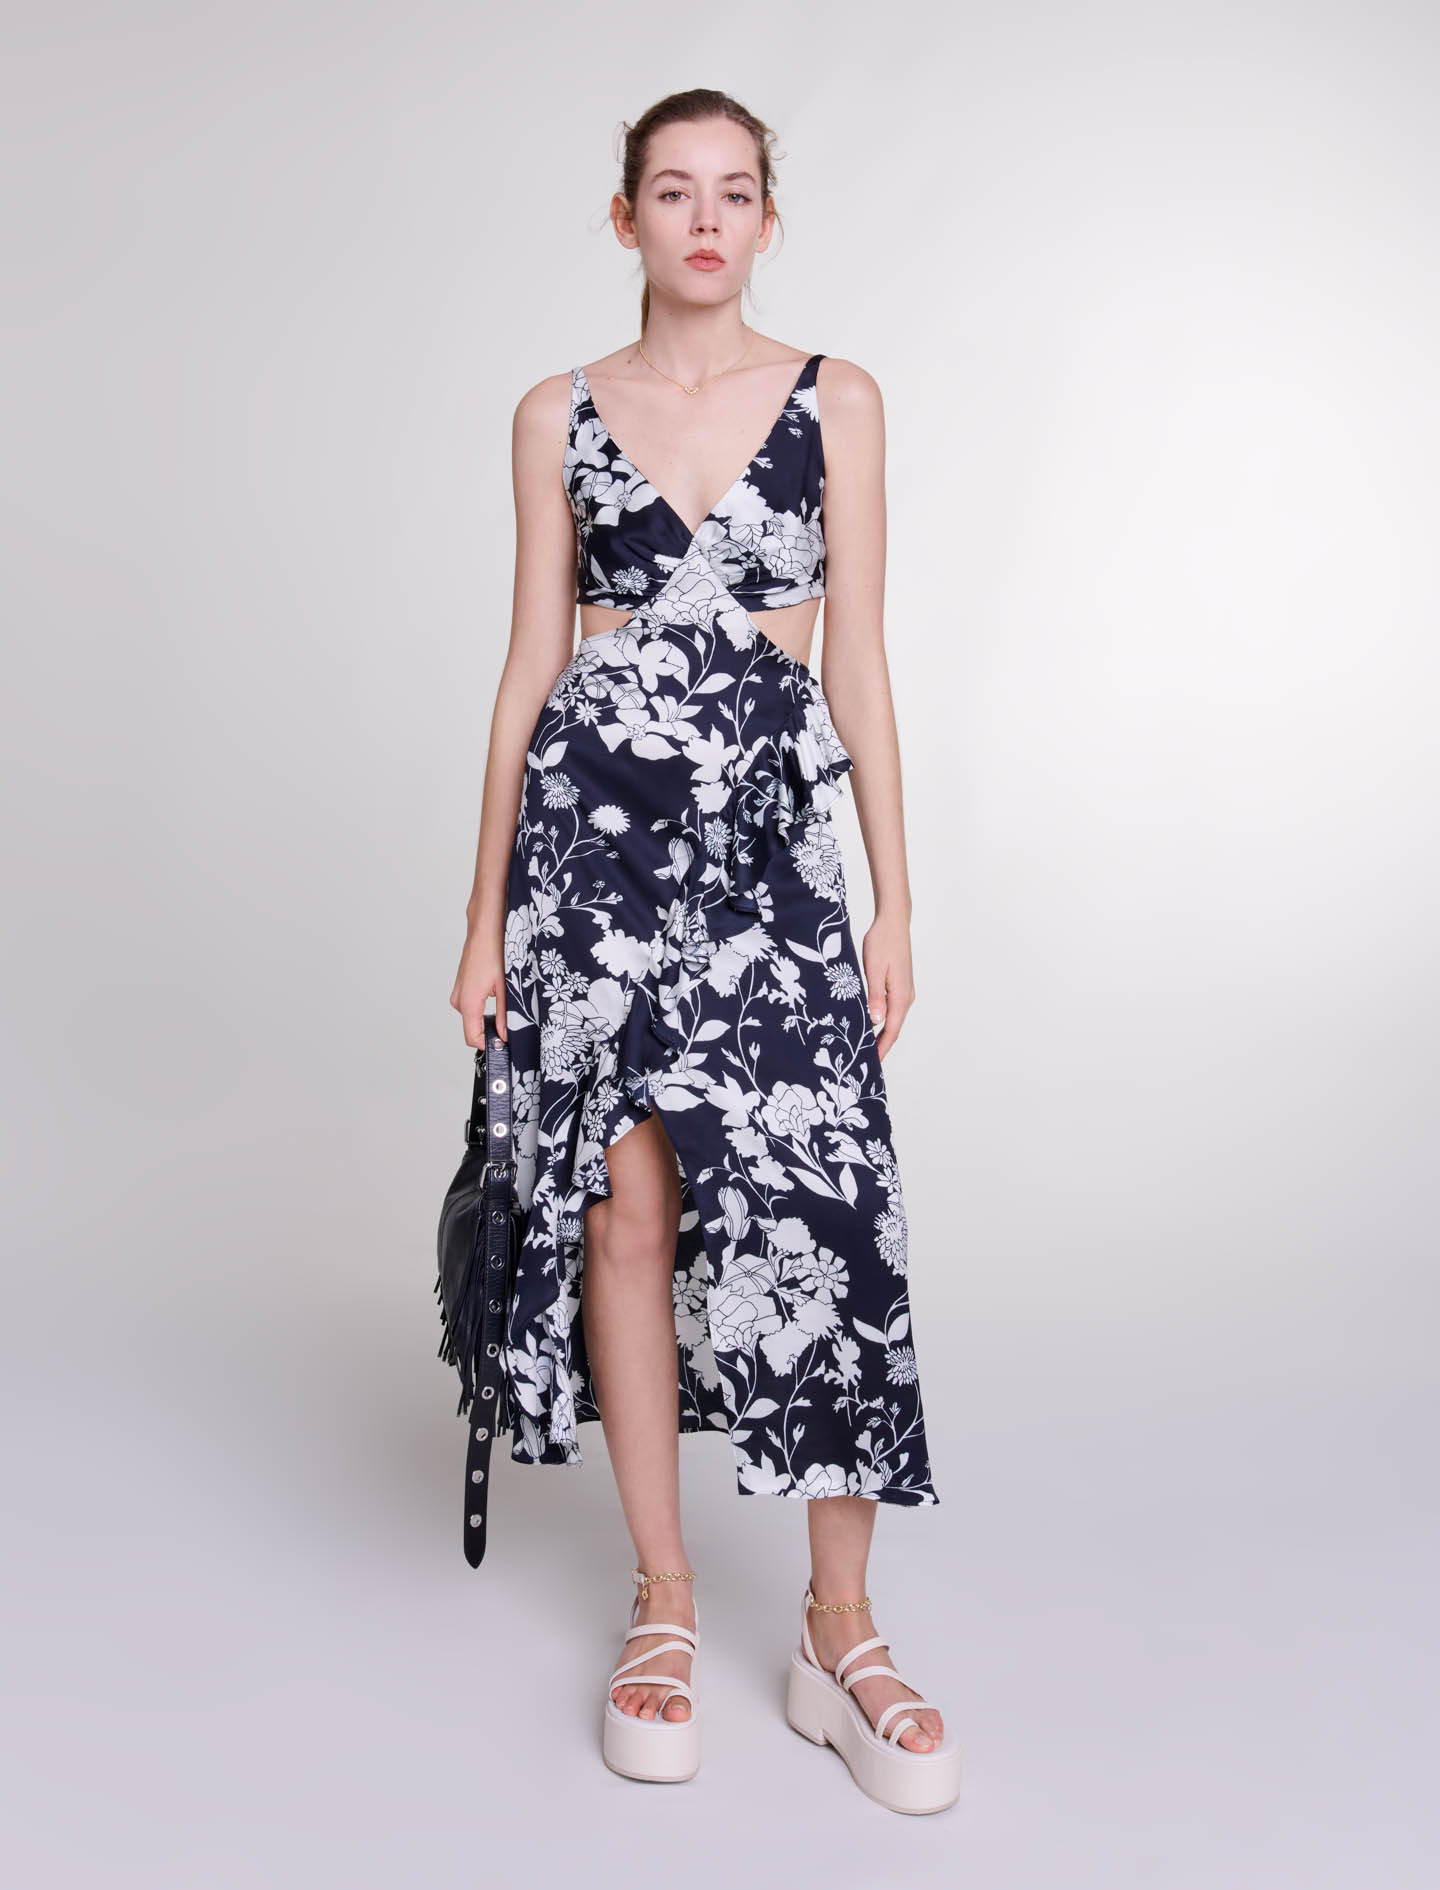 Maje Woman's viscose Lining: Cutaway maxi dress for Spring/Summer, in color Floral ecru black print /